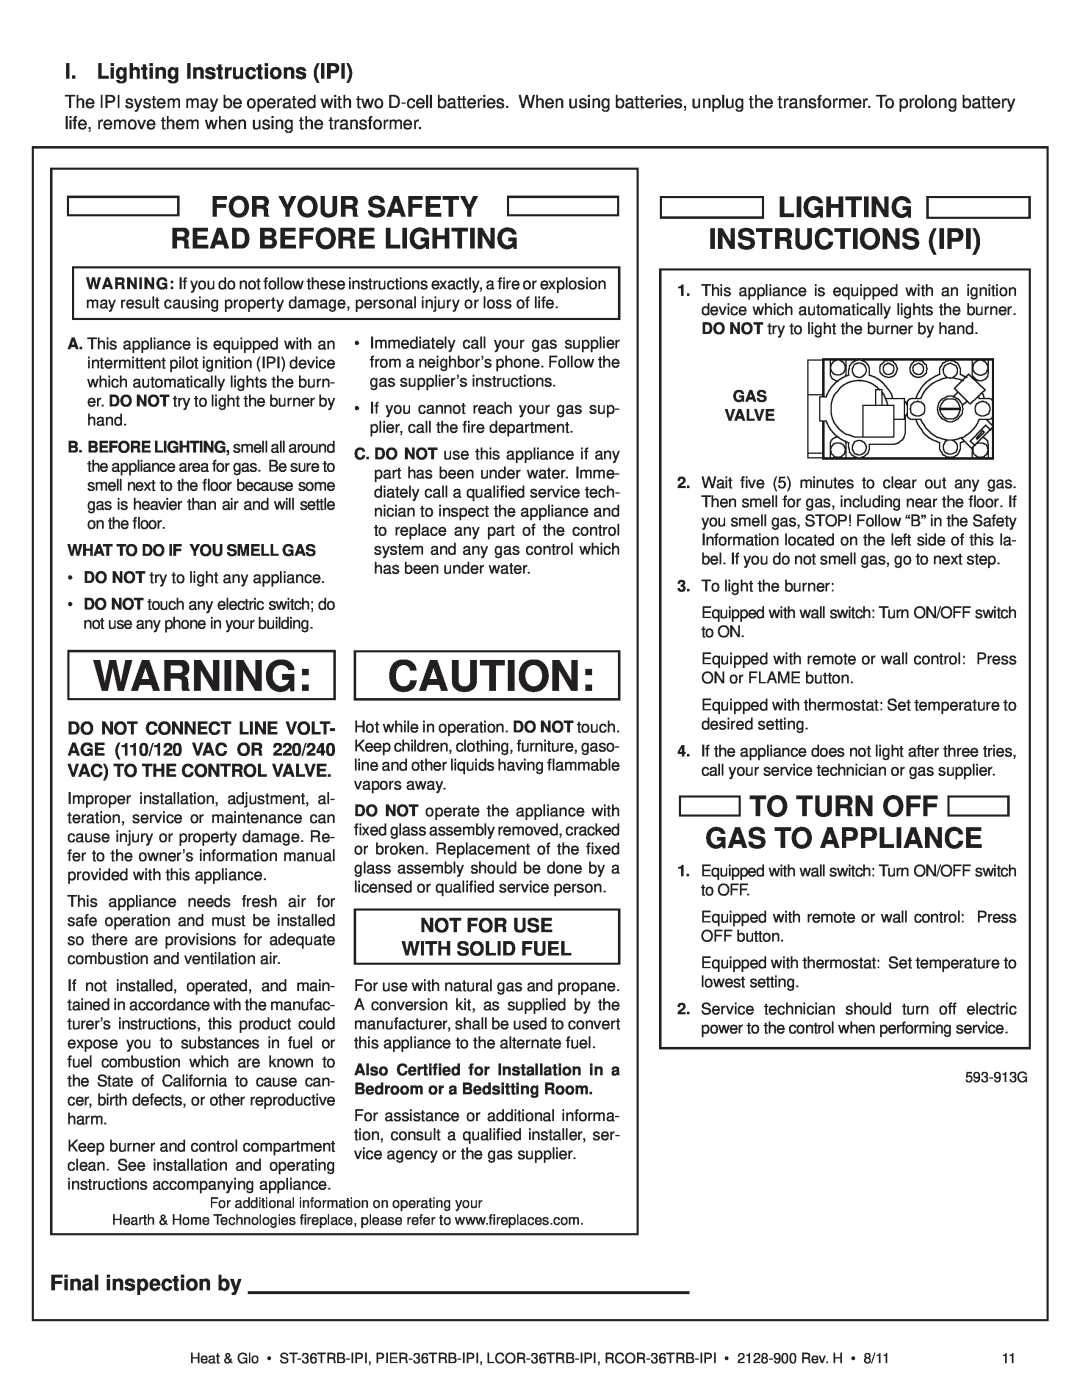 Heat & Glo LifeStyle ST-36TRB-IPI For Your Safety Read Before Lighting, Lighting Instructions Ipi, Final inspection by 